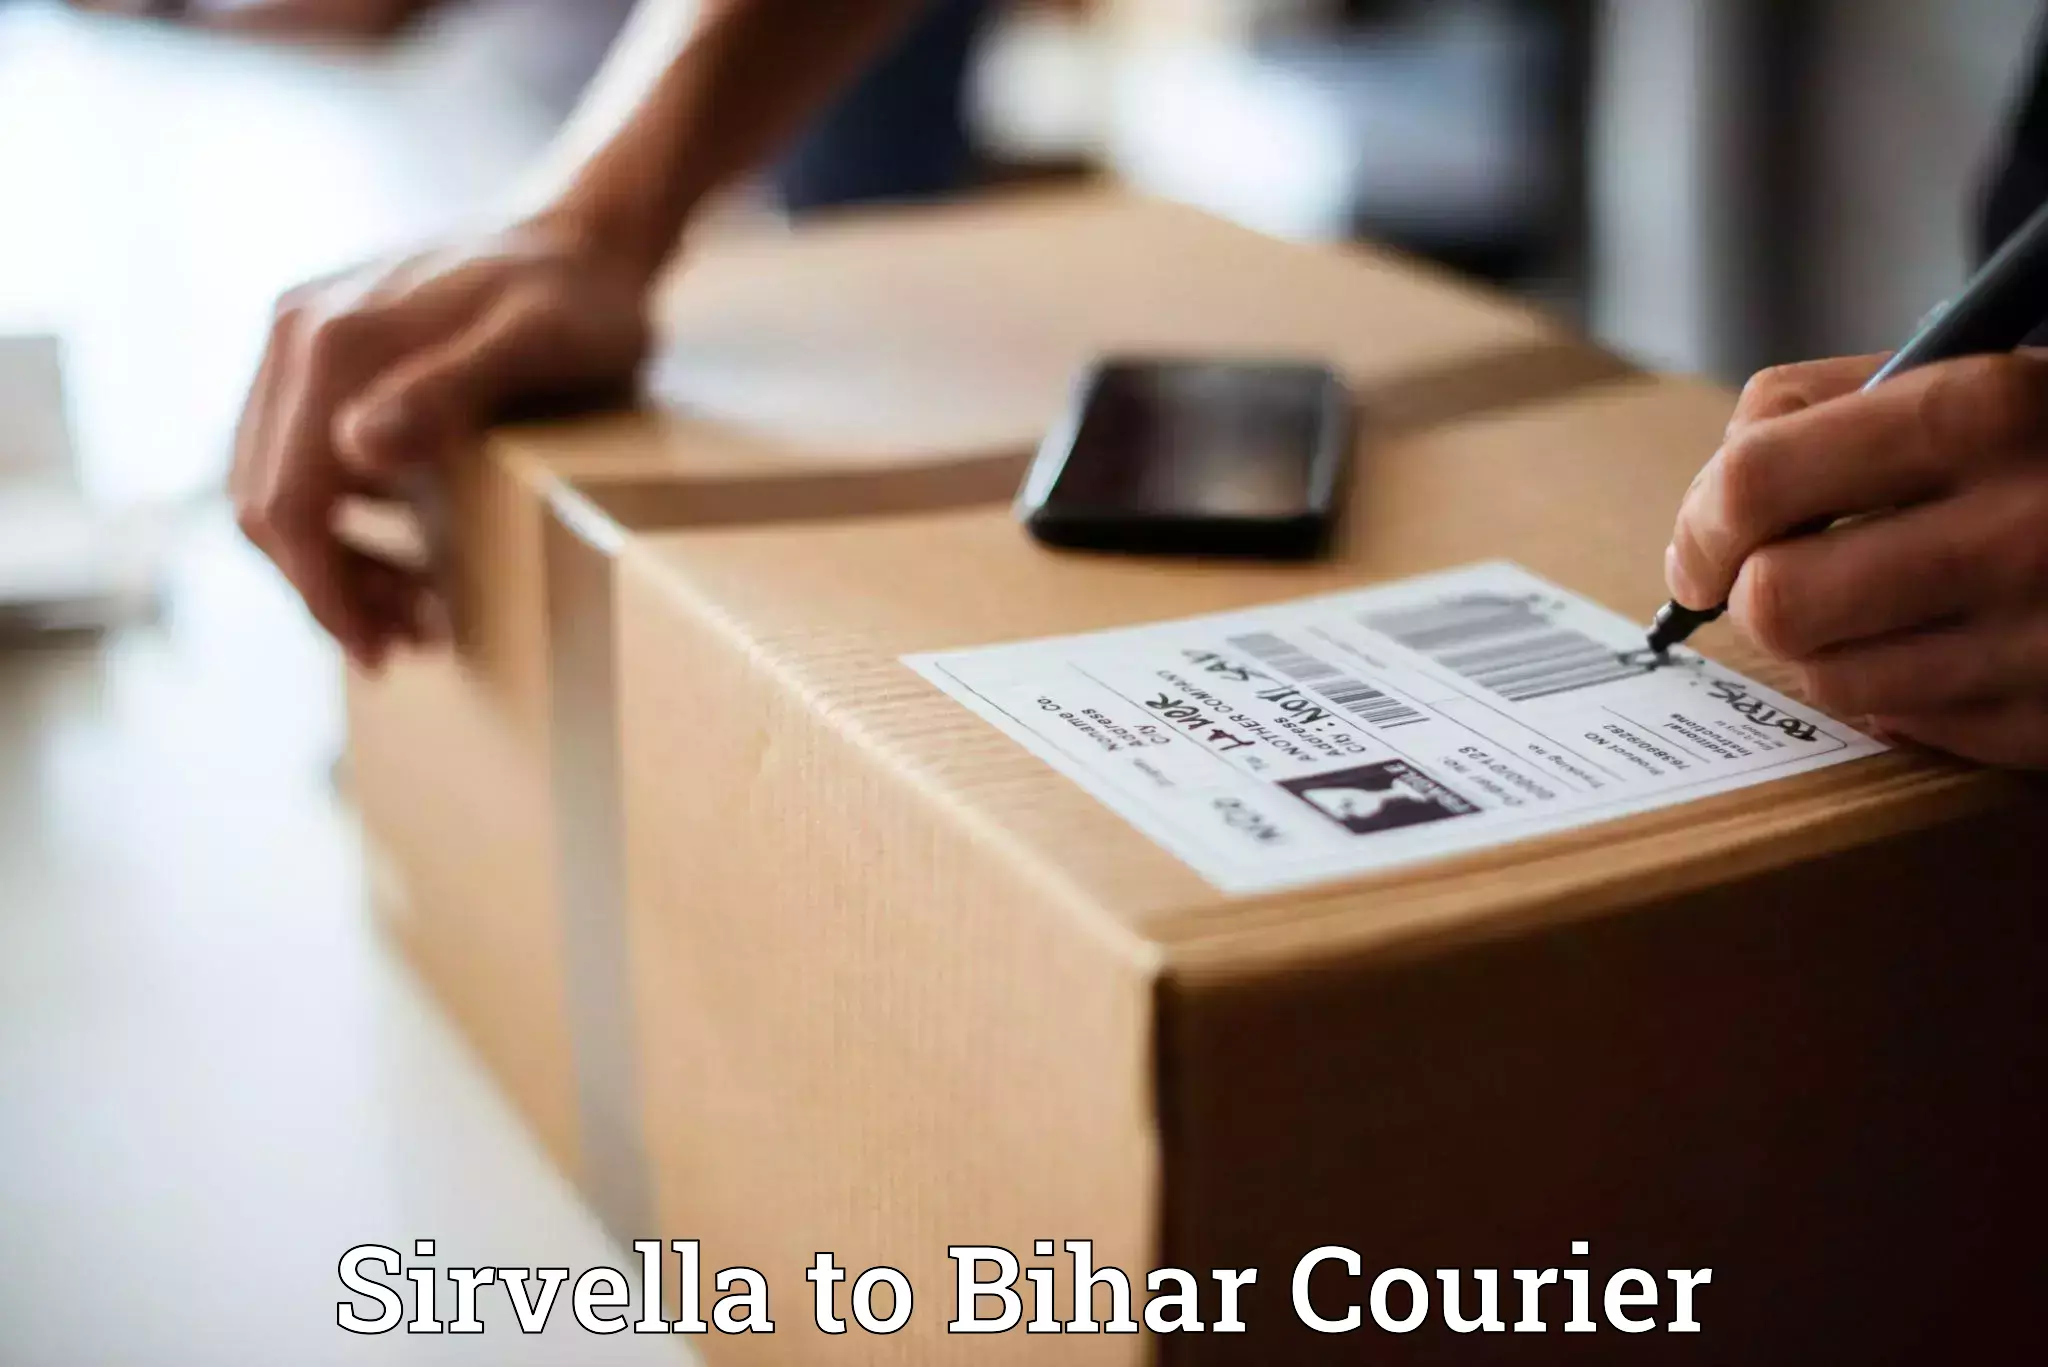 Courier service booking Sirvella to Saharsa